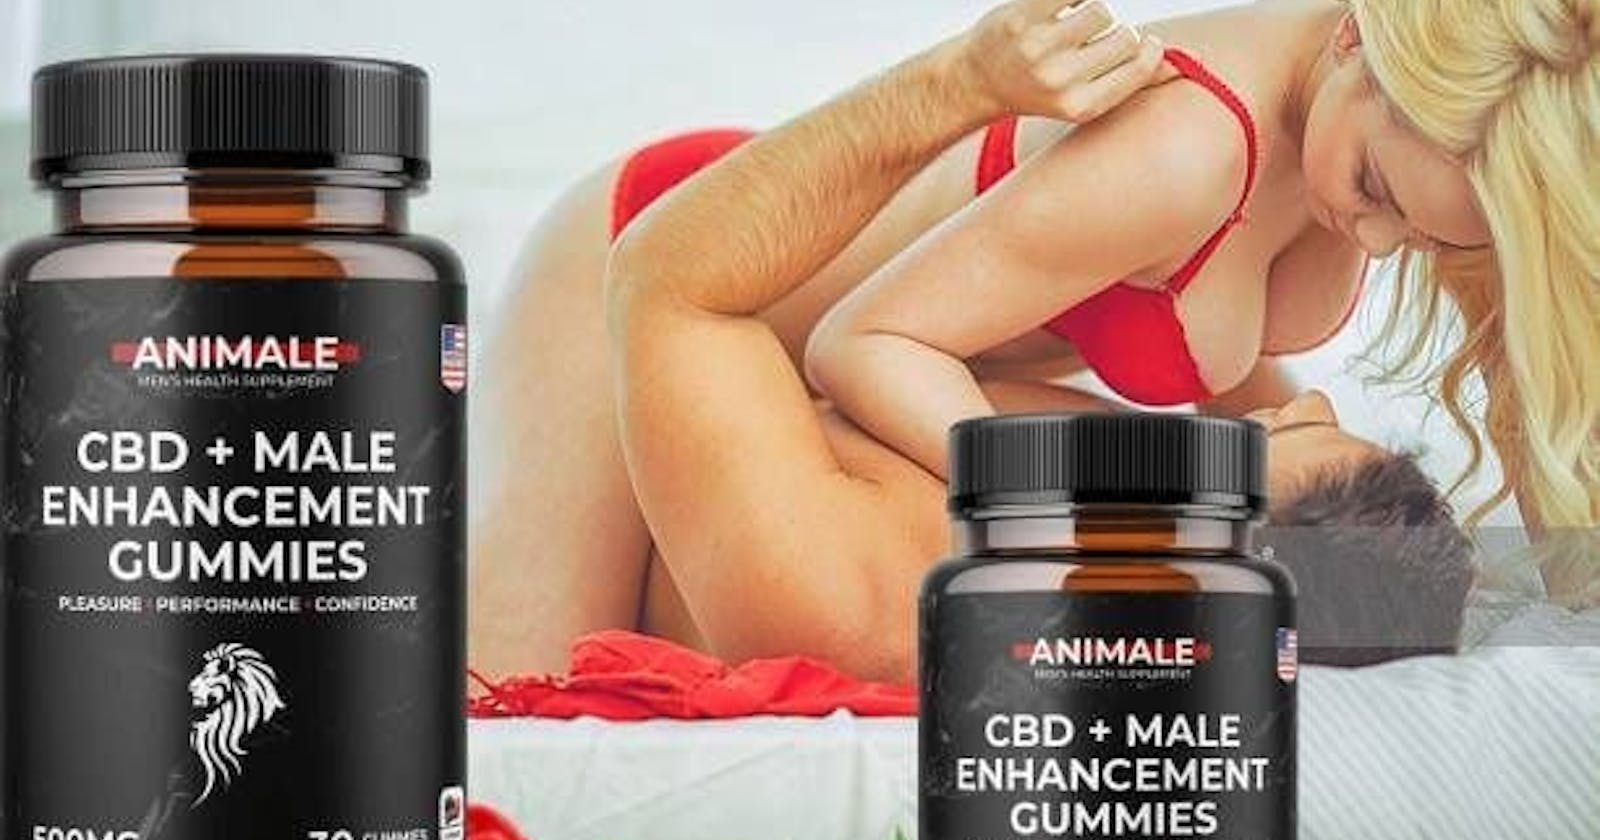 Animale CBD Gummies South Africa Reviews - Is It  Legit Or Fake? Animale Male Enhancement Reviews